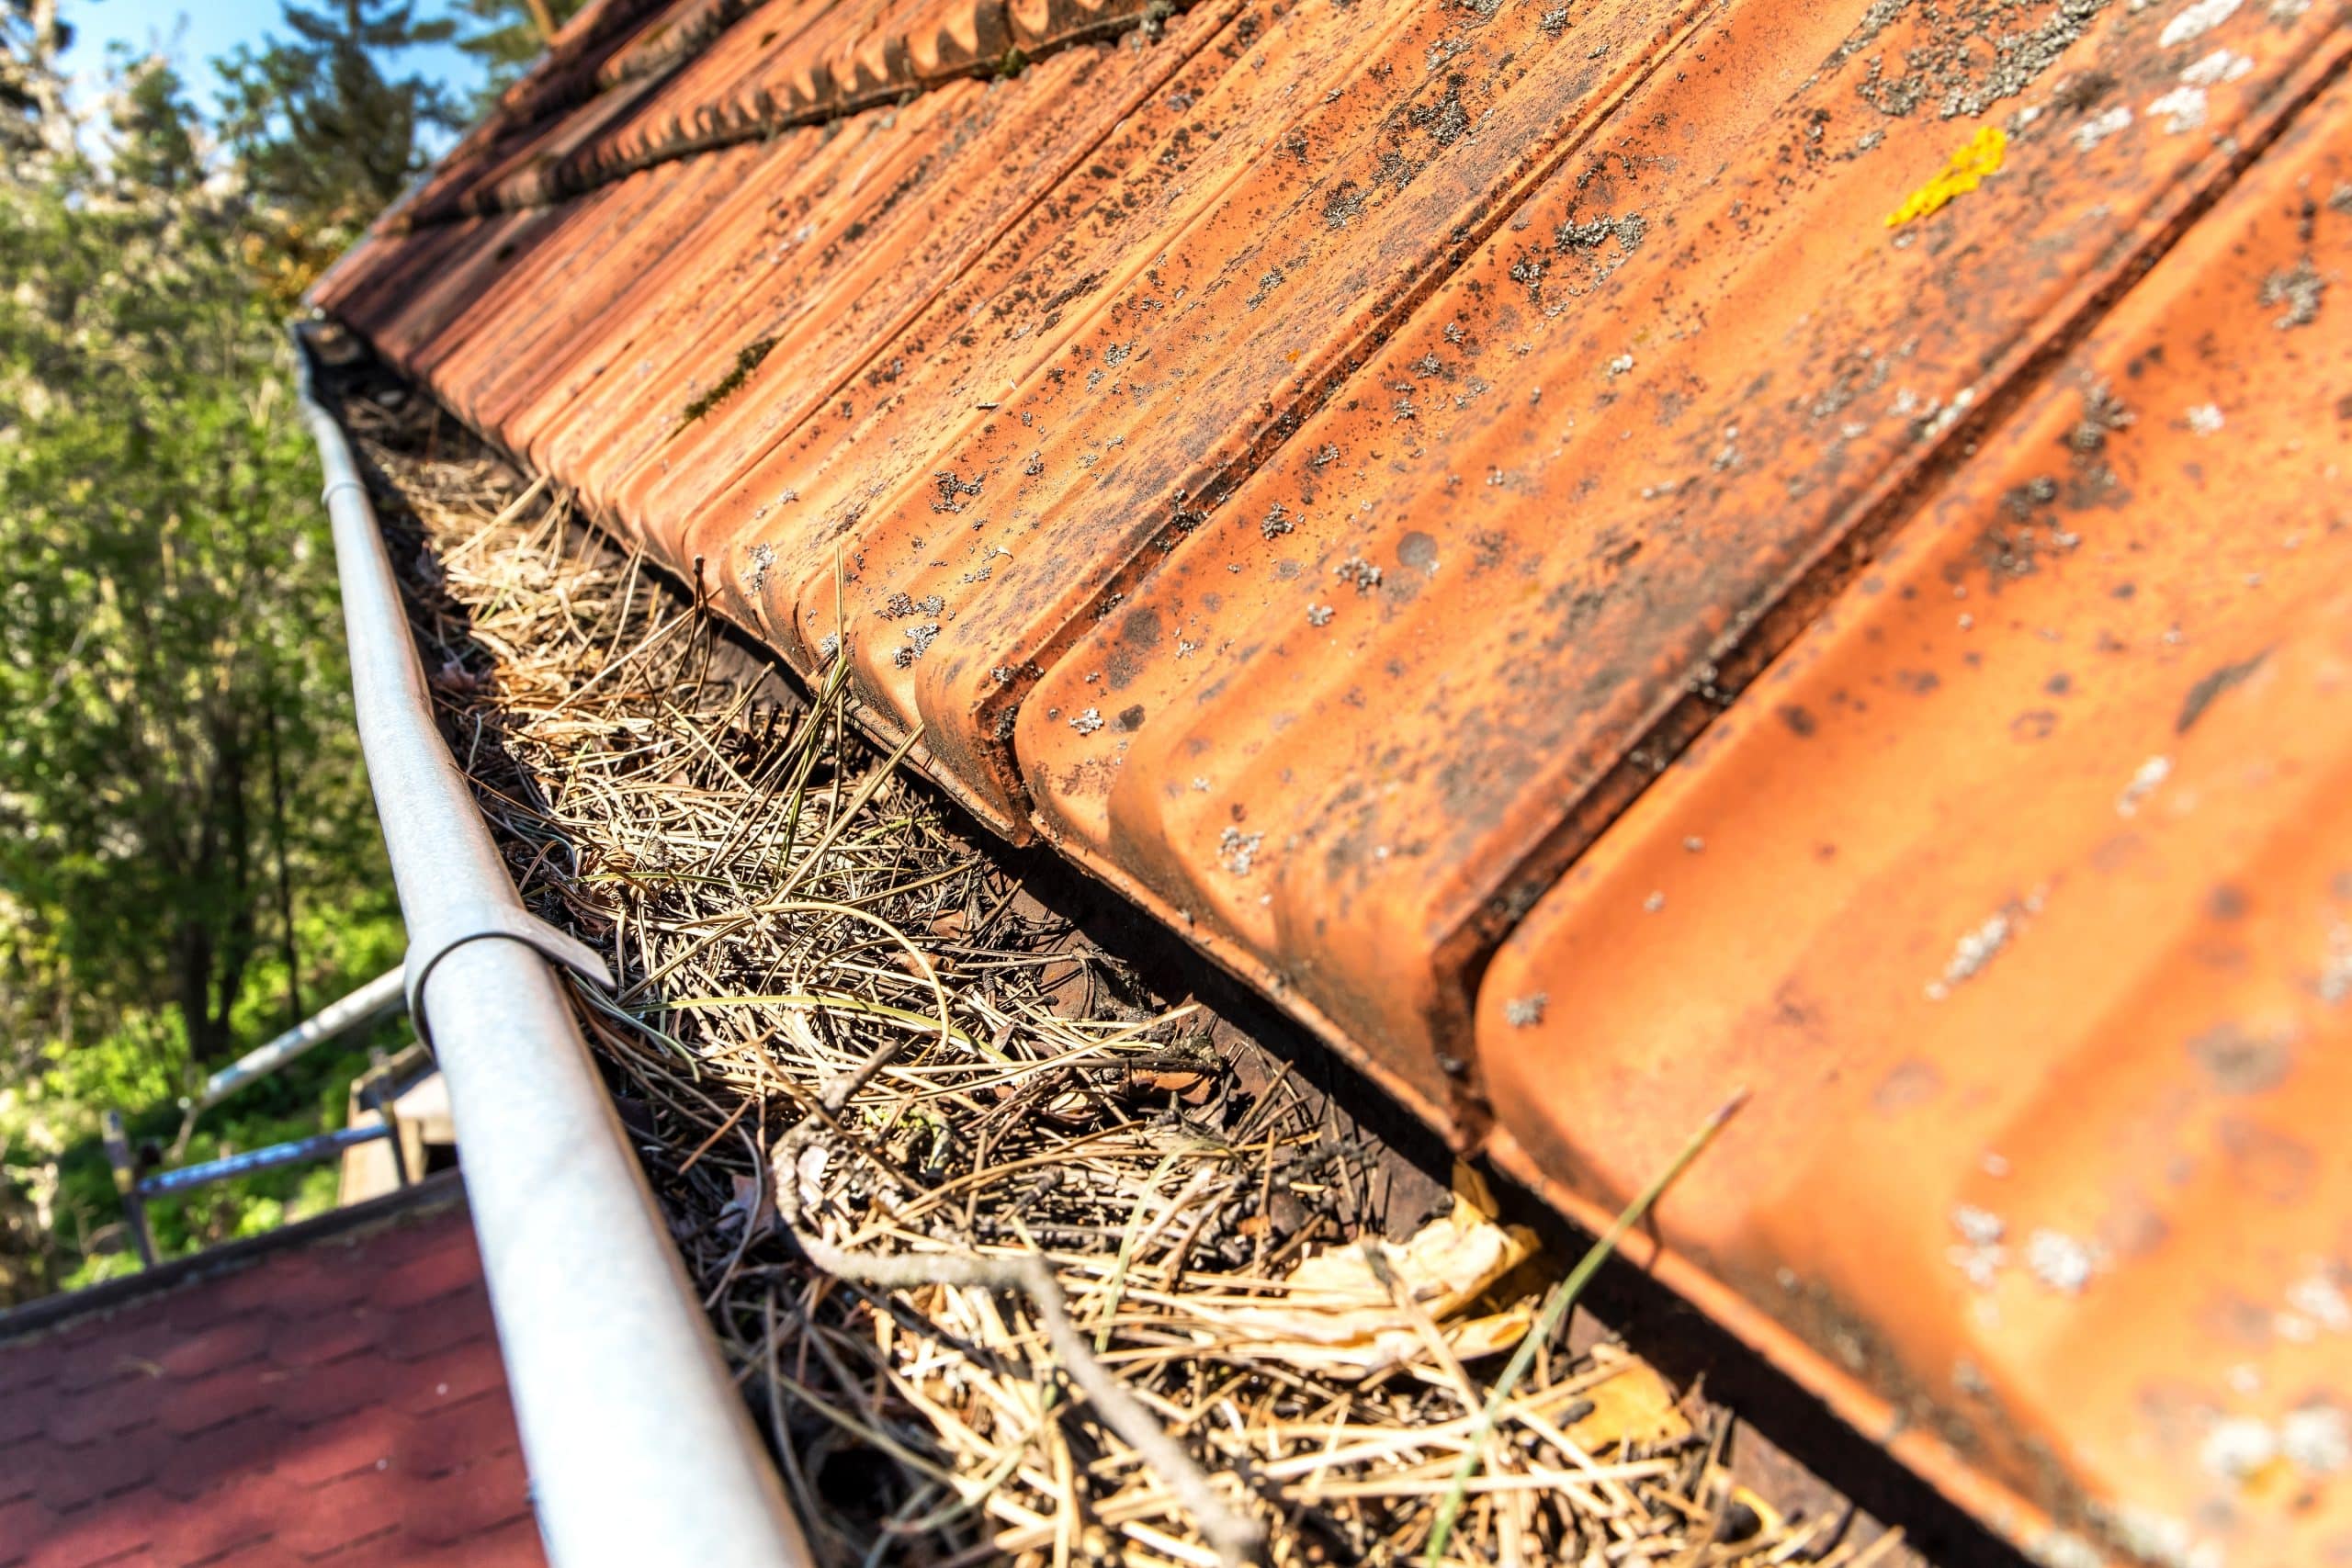 Gutters full of debris needing to guttering cleaning services. Roof gutter clogged with pine needles and debris.